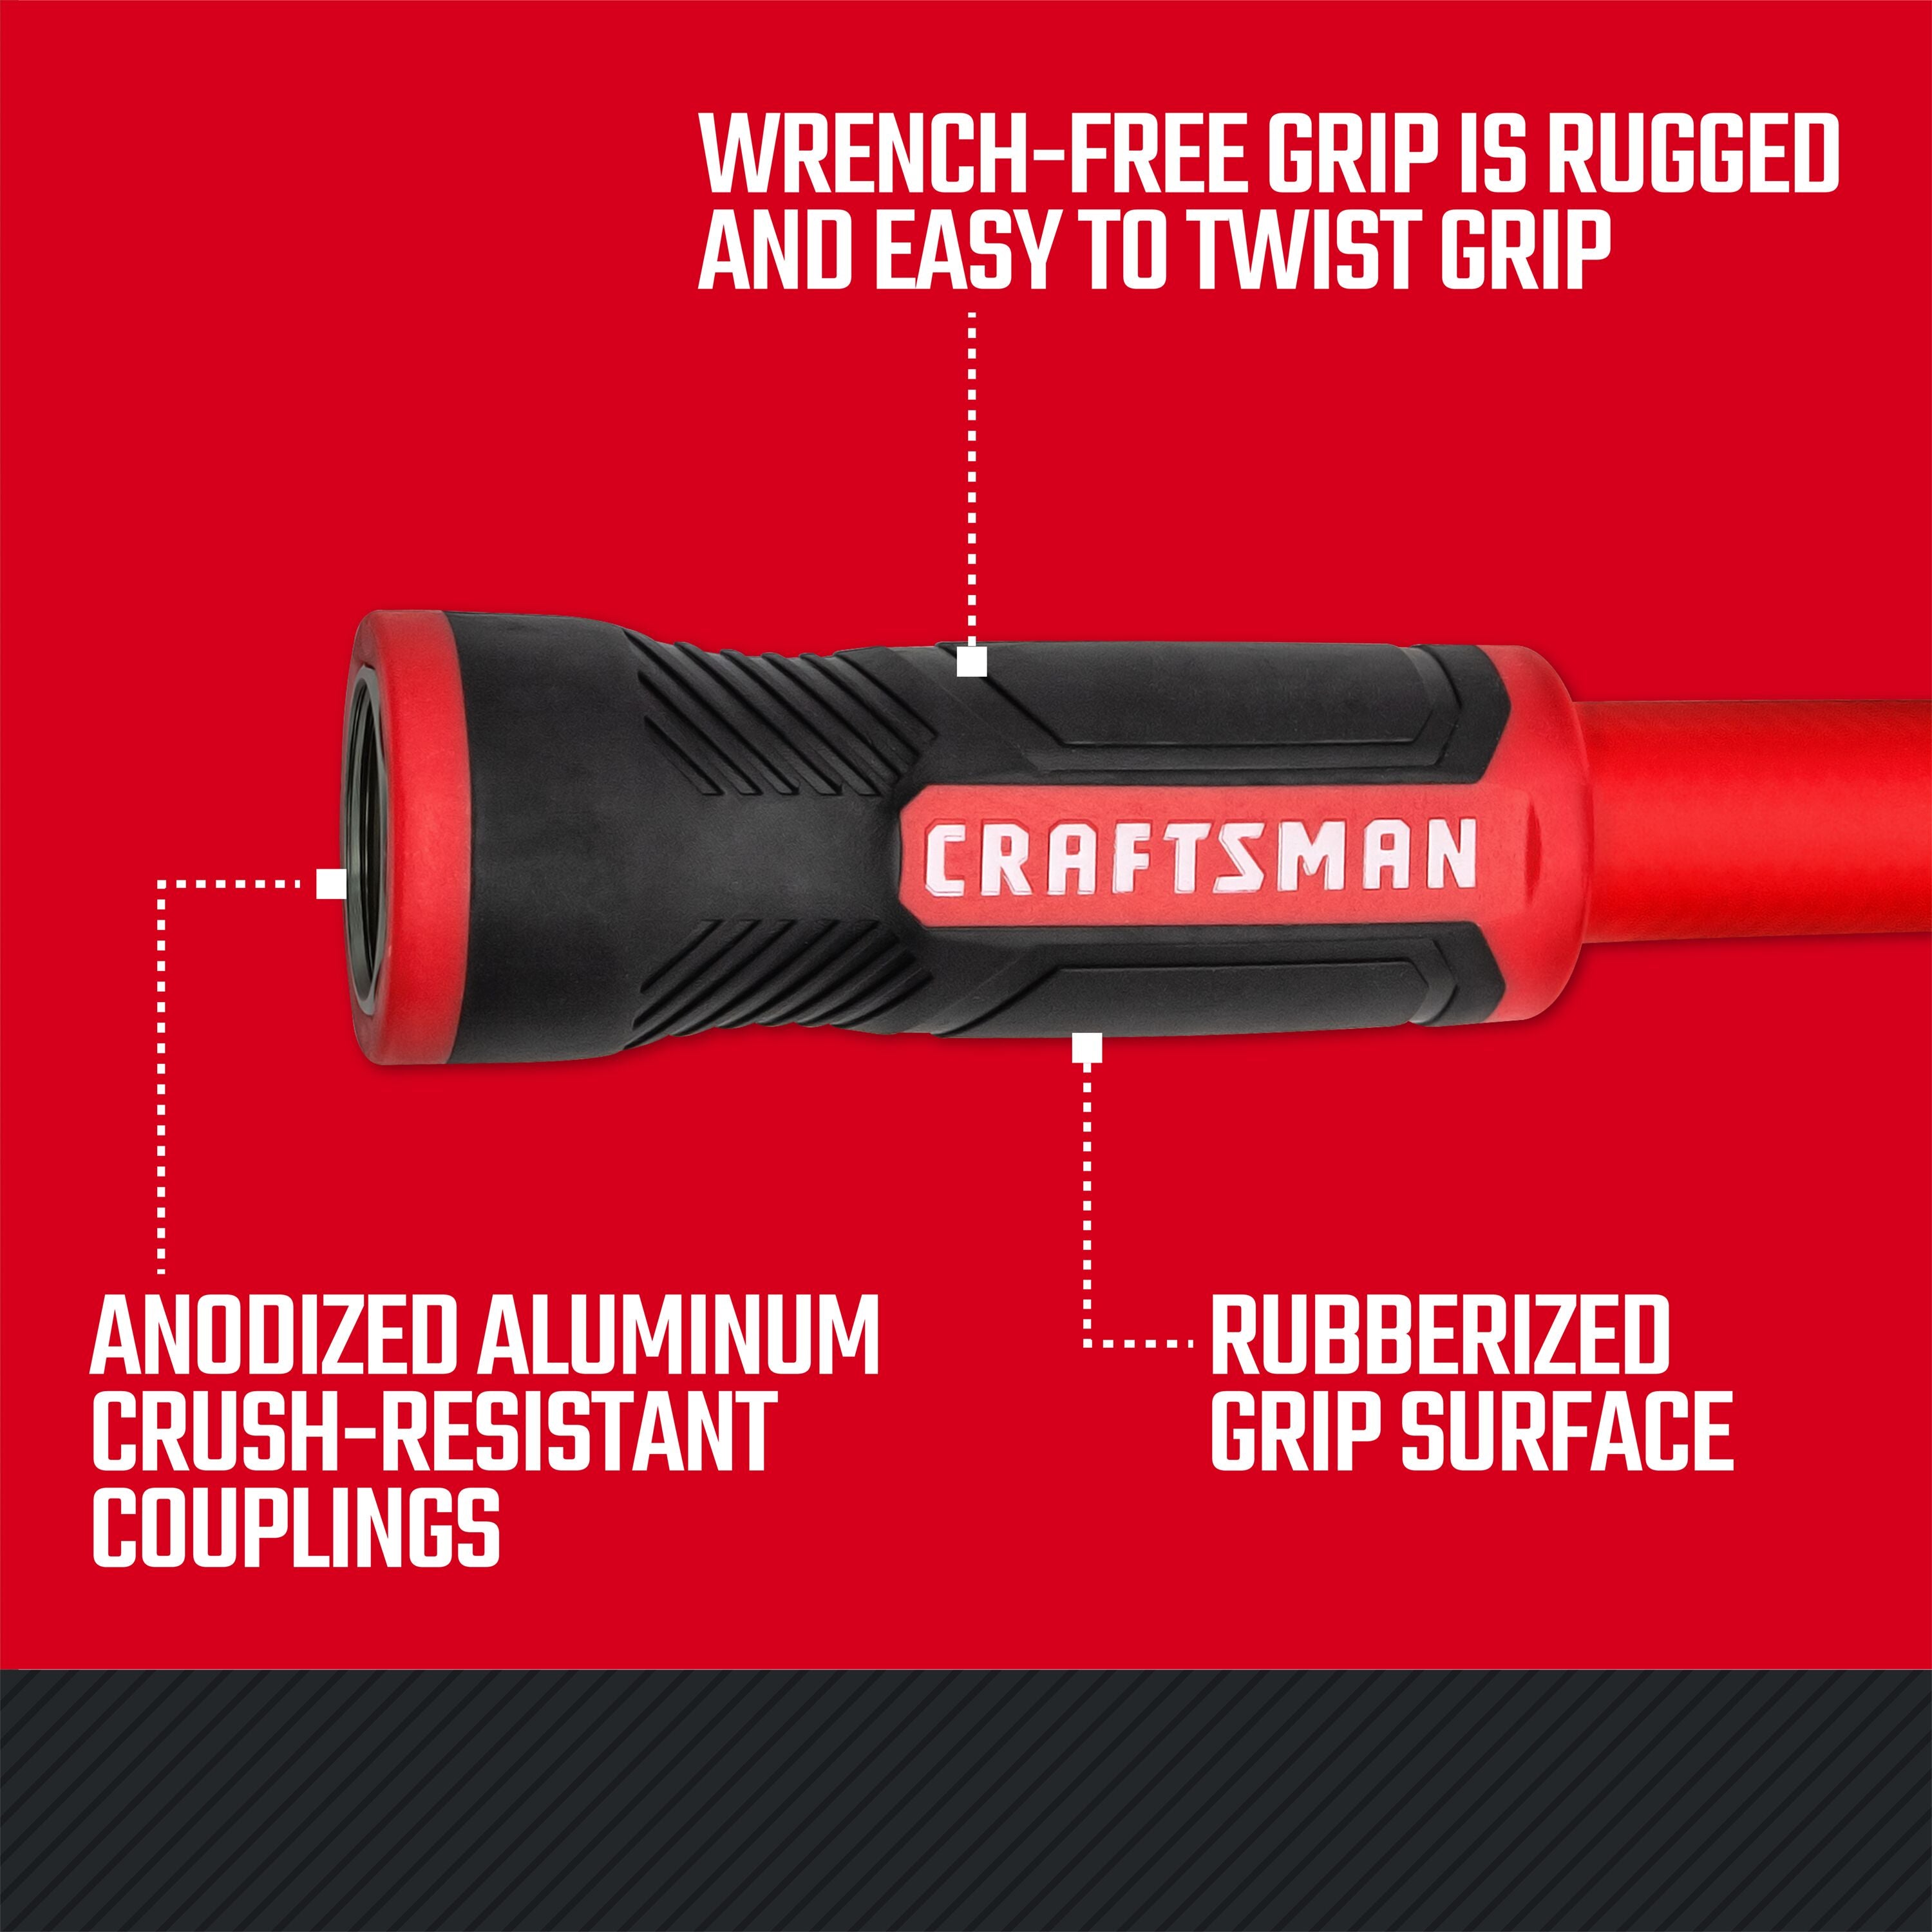 Craftsman professional-grade hot water hose coupling. Featuring crush-resistant anodized aluminum with rubberized grip graphic